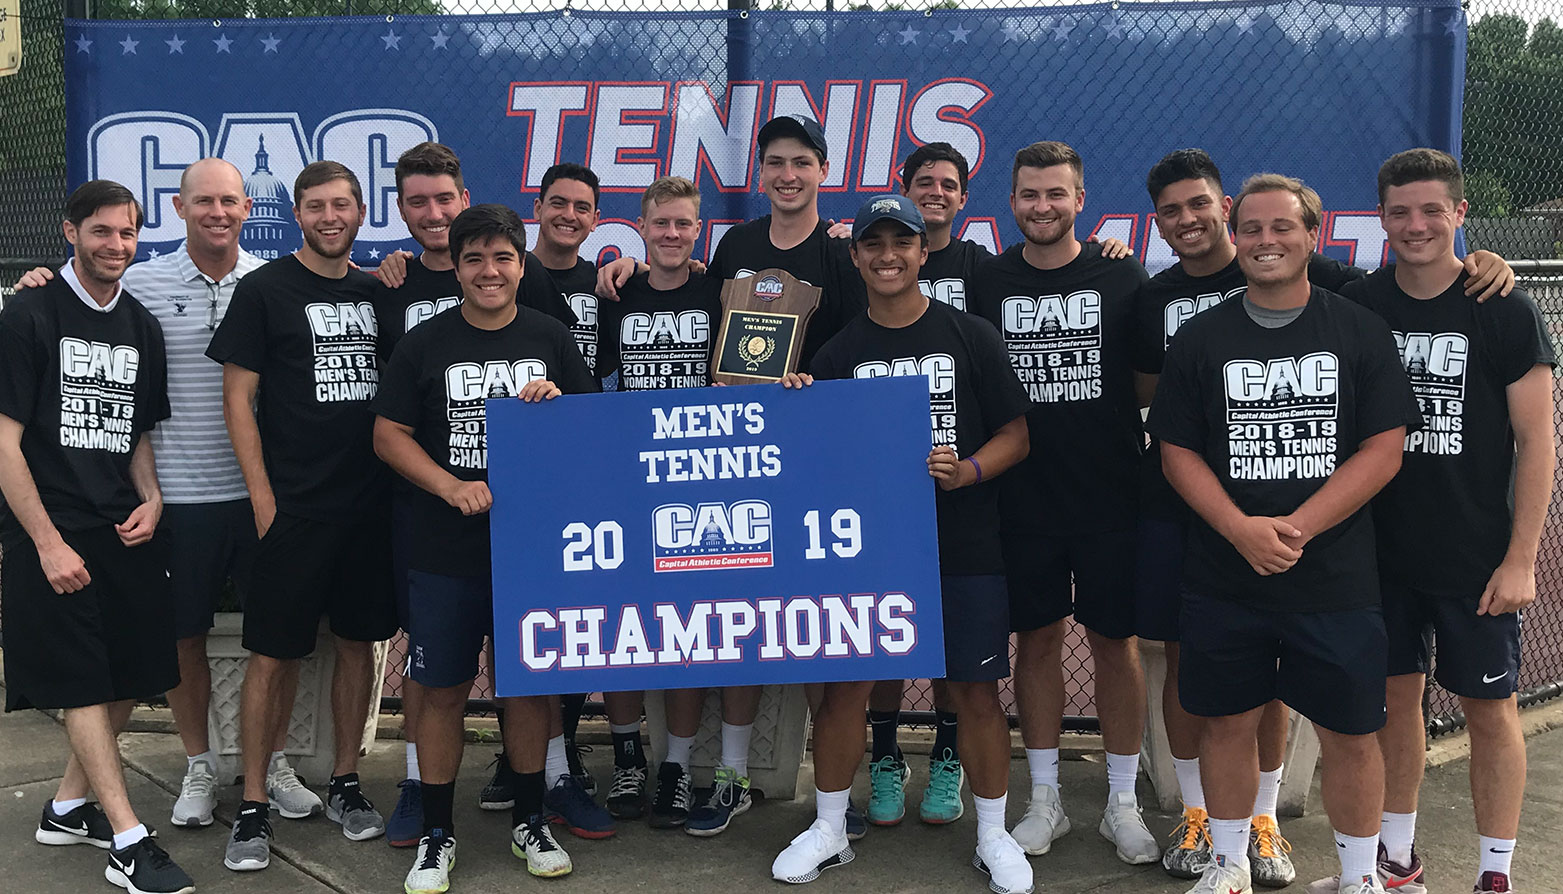 Mary Washington Tops Christopher Newport for 24th CAC Men's Tennis Championship